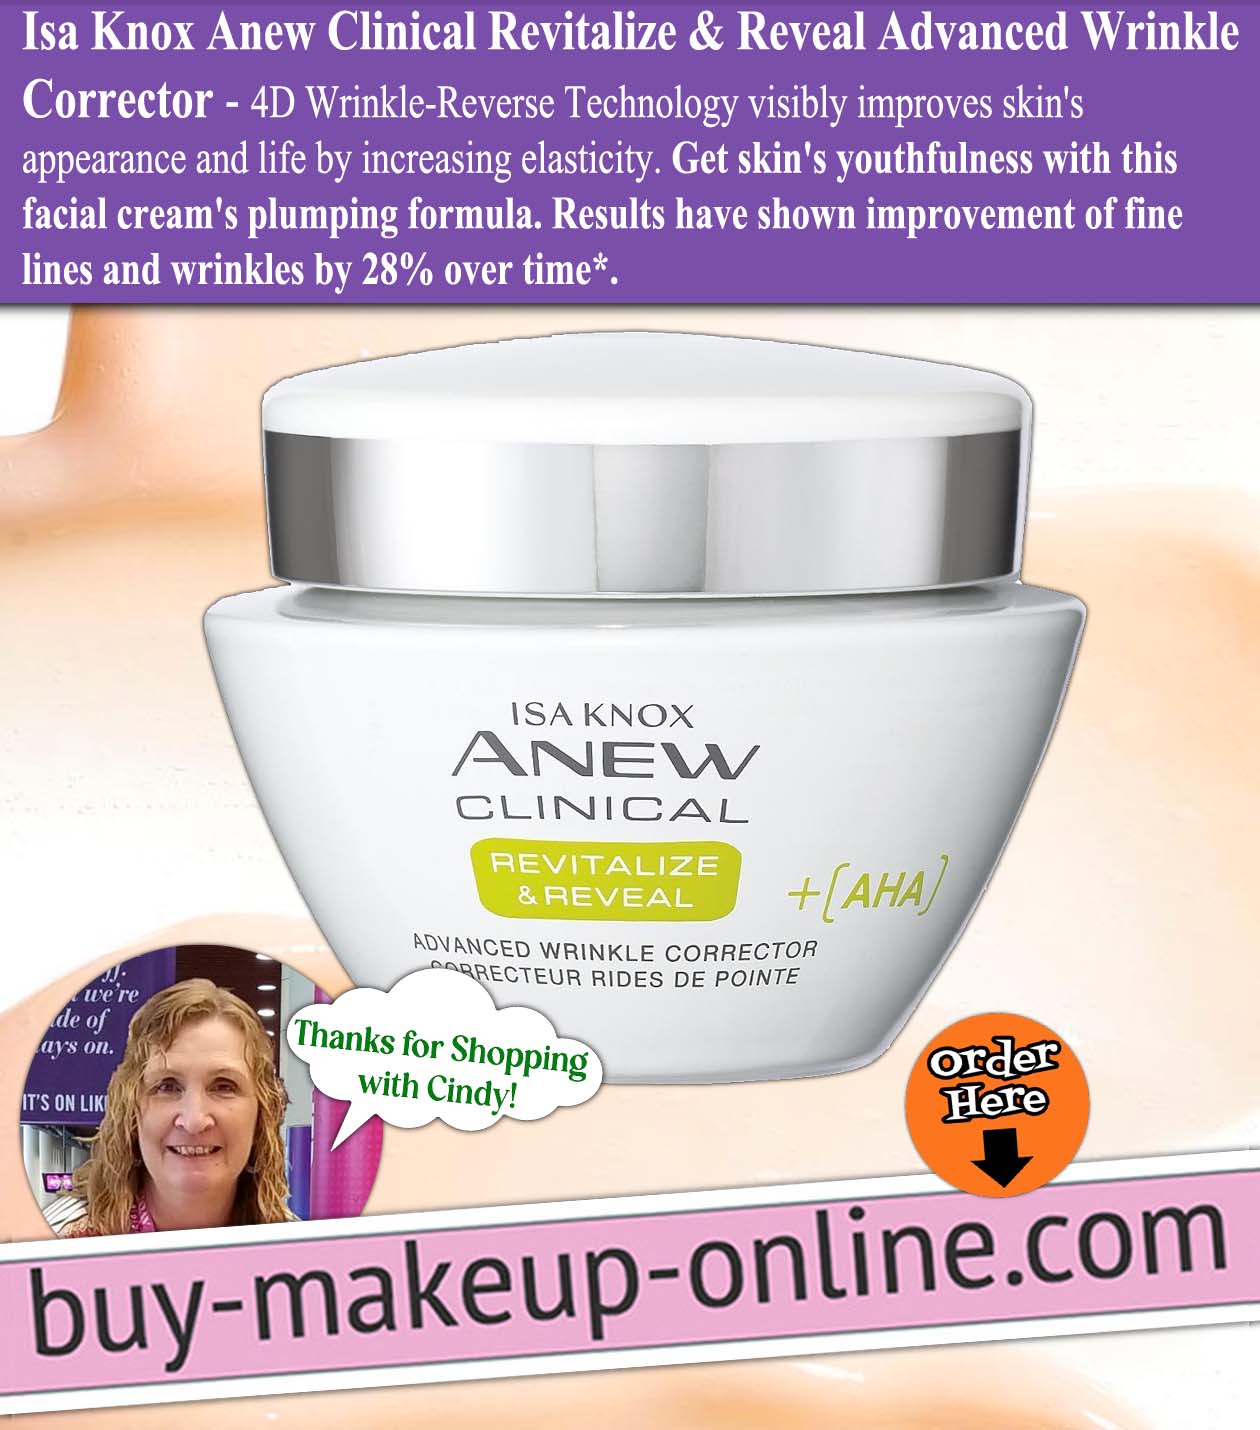 AVON Isa Knox Anew Clinical Revitalize & Reveal Advanced Wrinkle Corrector 